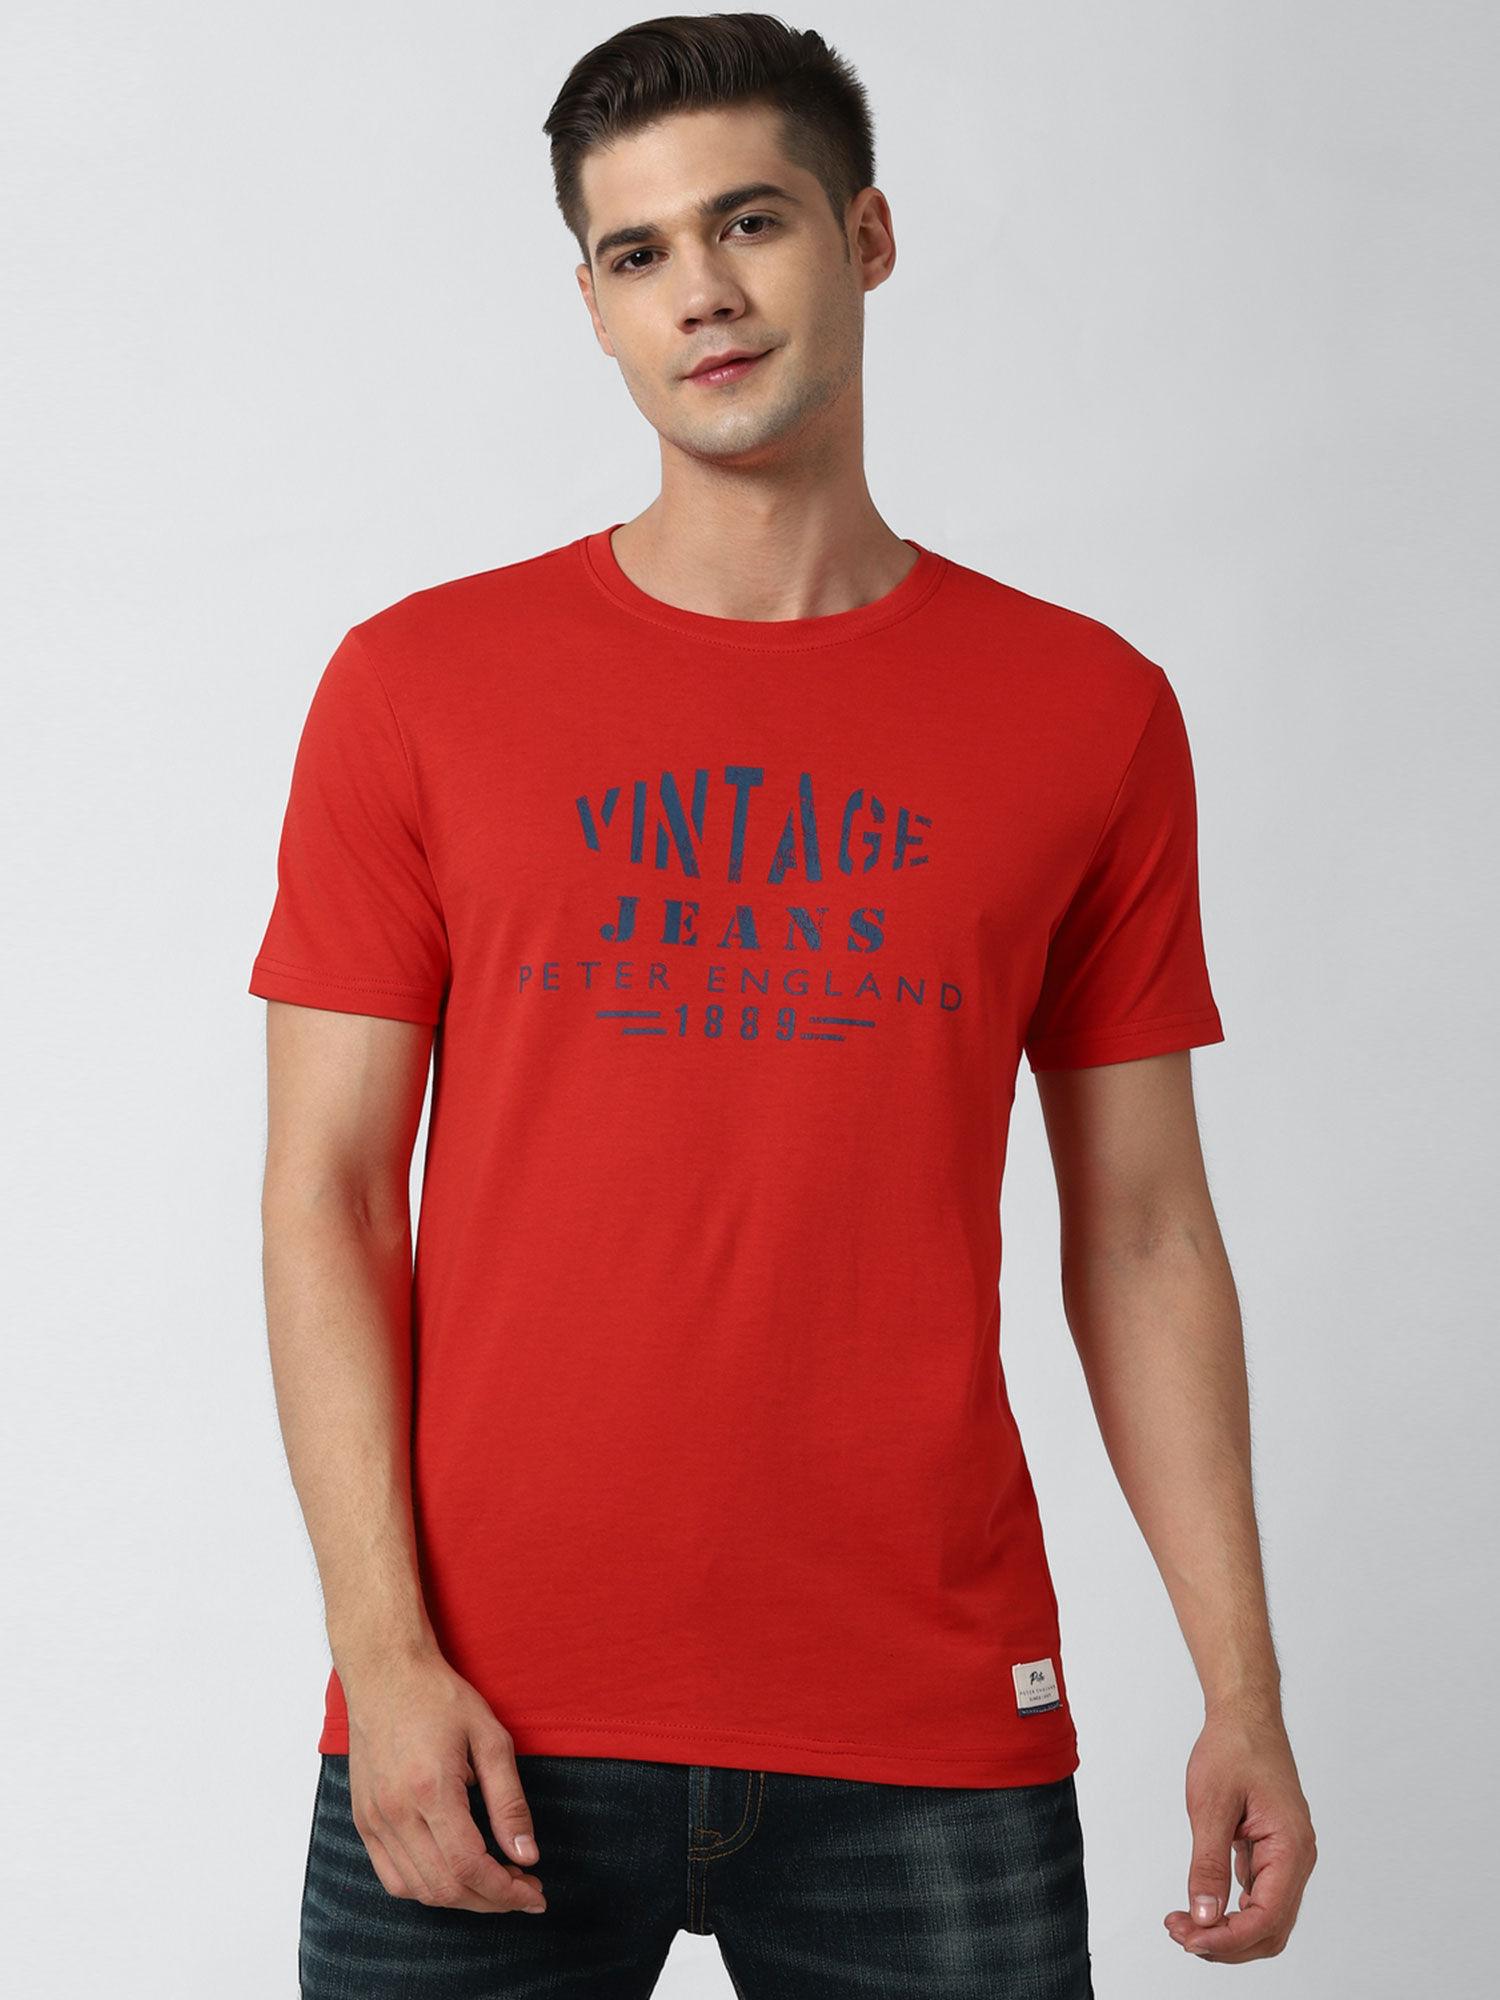 red crew neck t-shirt